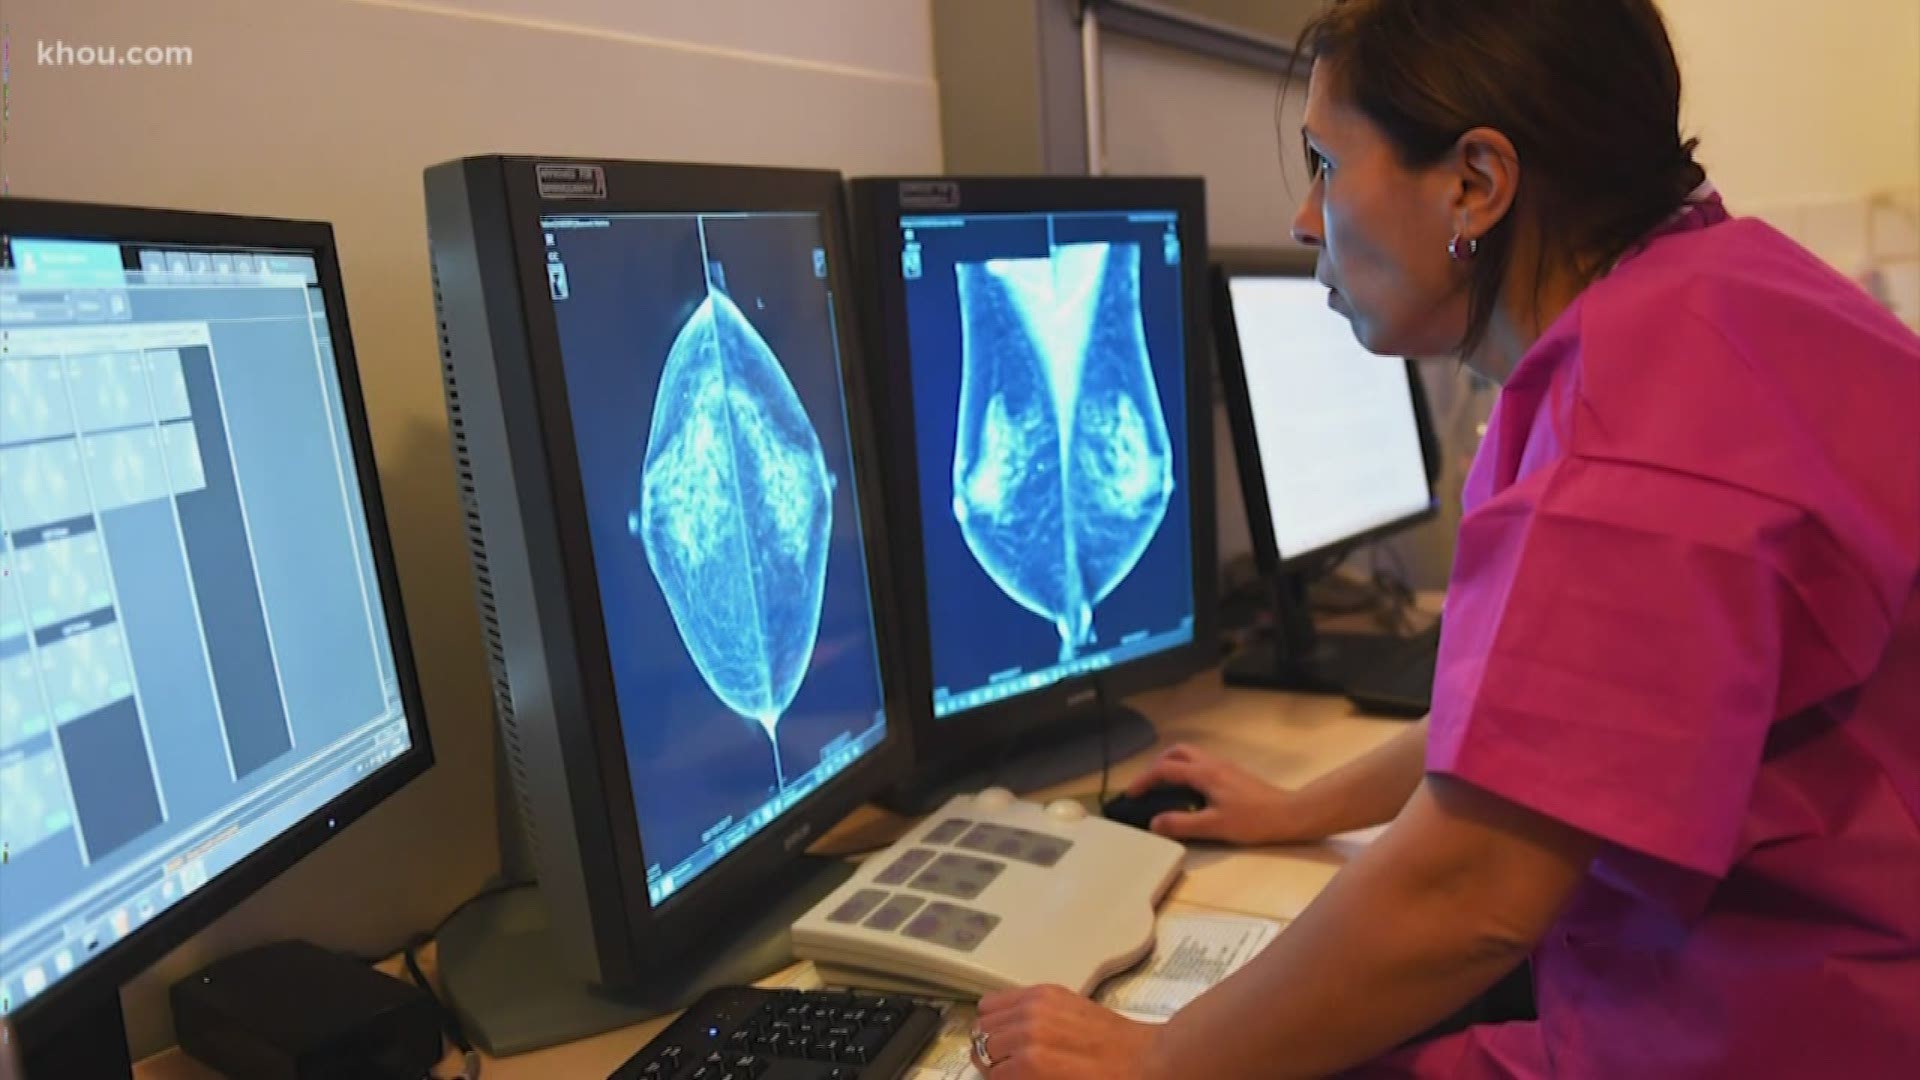 Can carrying my mobile phone in my bra give me breast cancer?